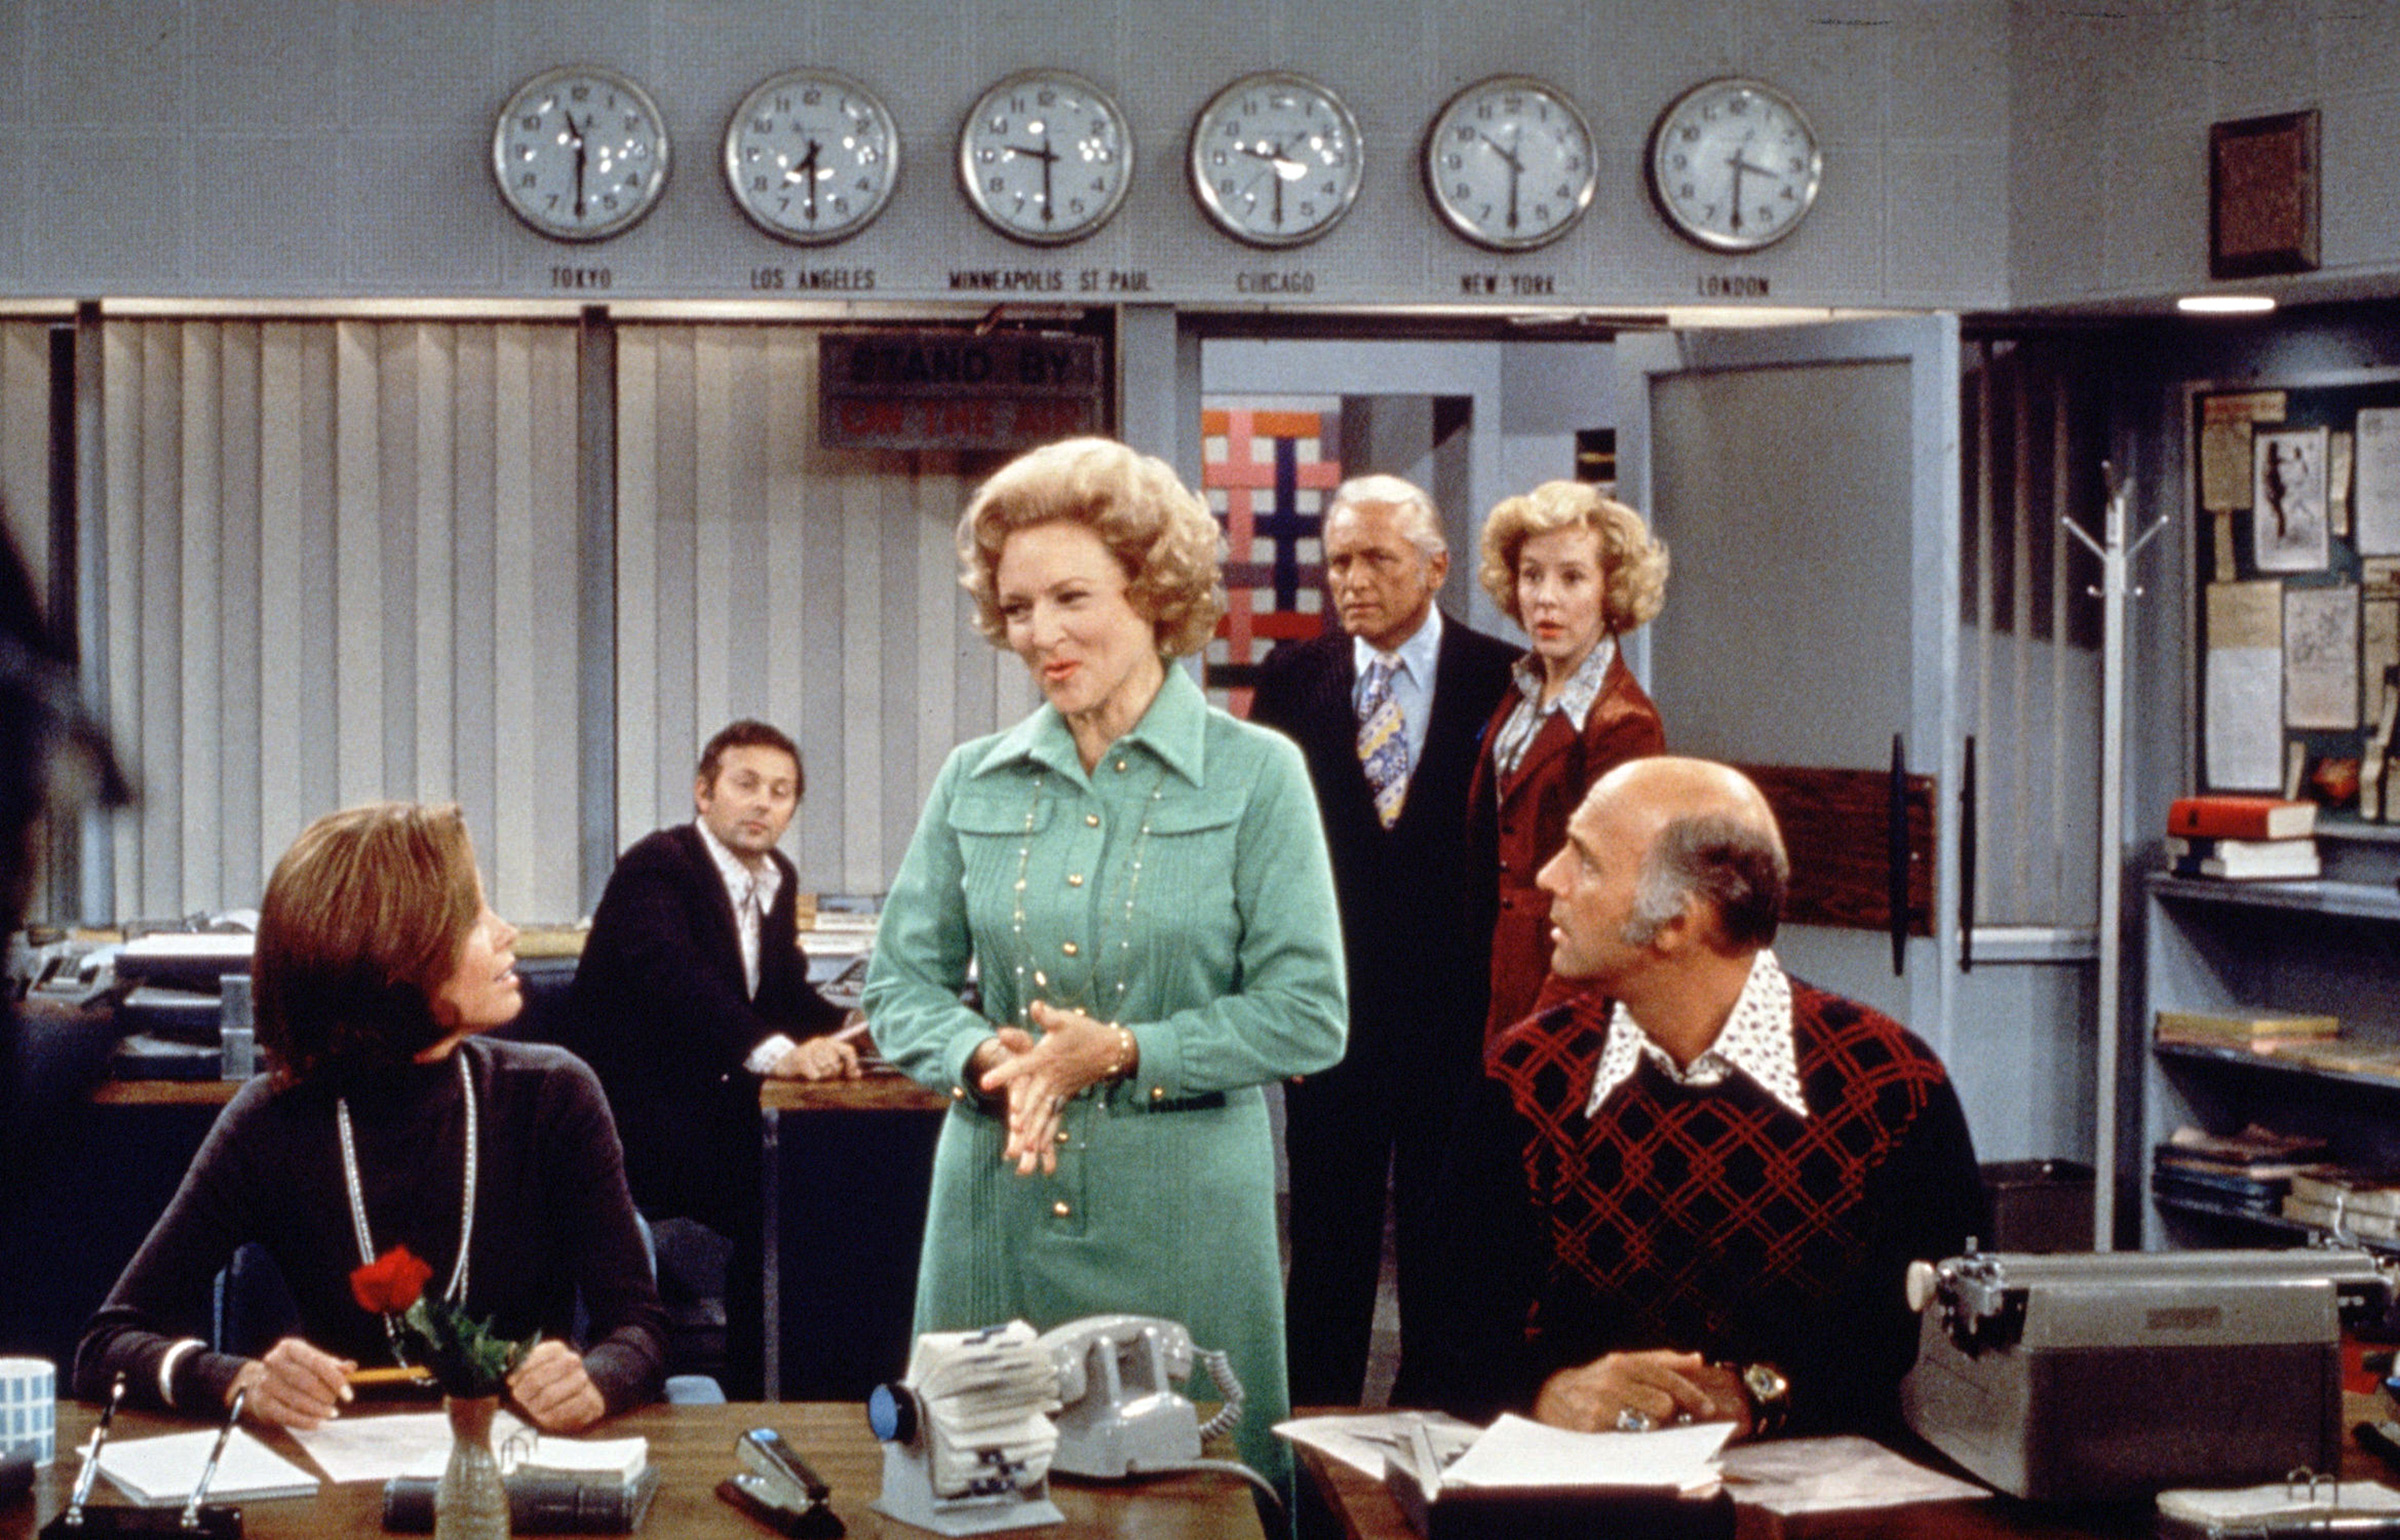 Betty White, center, on The Mary Tyler Moore Show in 1973. (CBS/Getty Images)